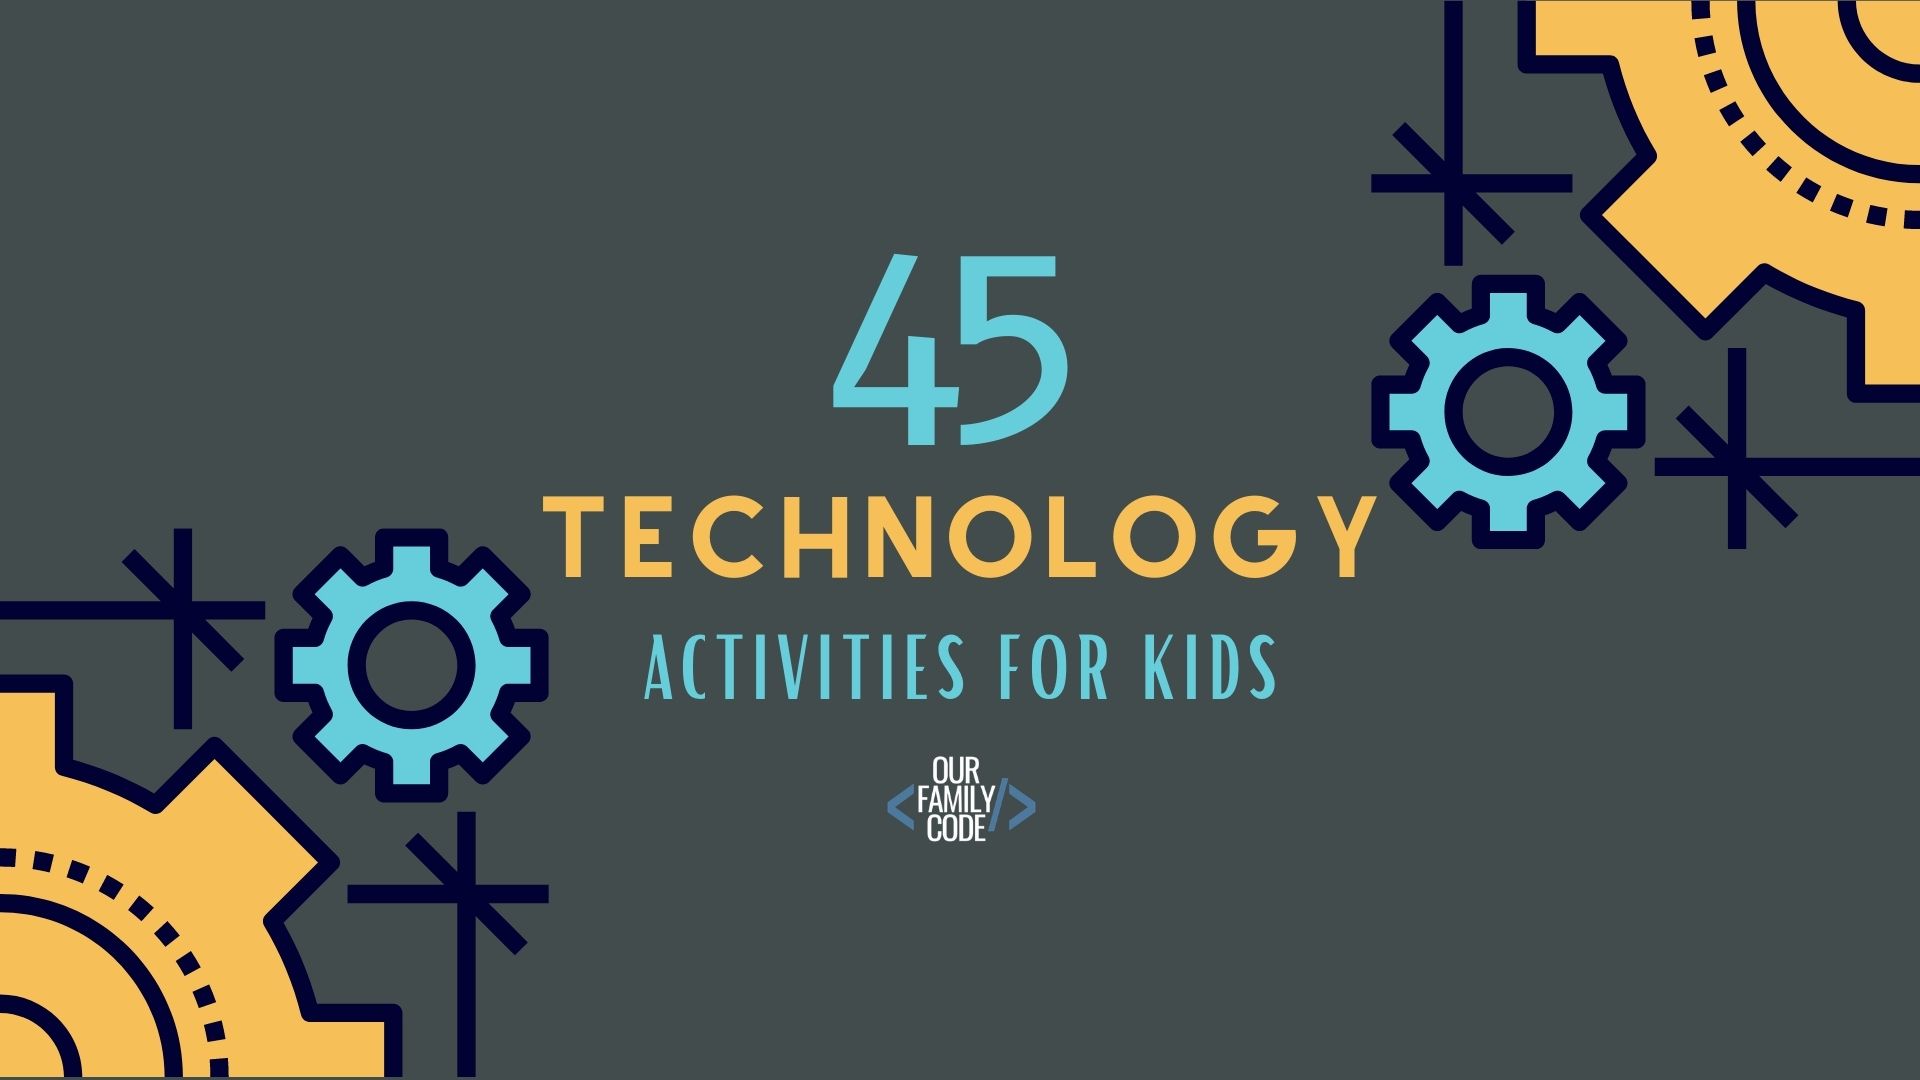 A picture of 45 technology activities for kids written in text on a gray background with gears.